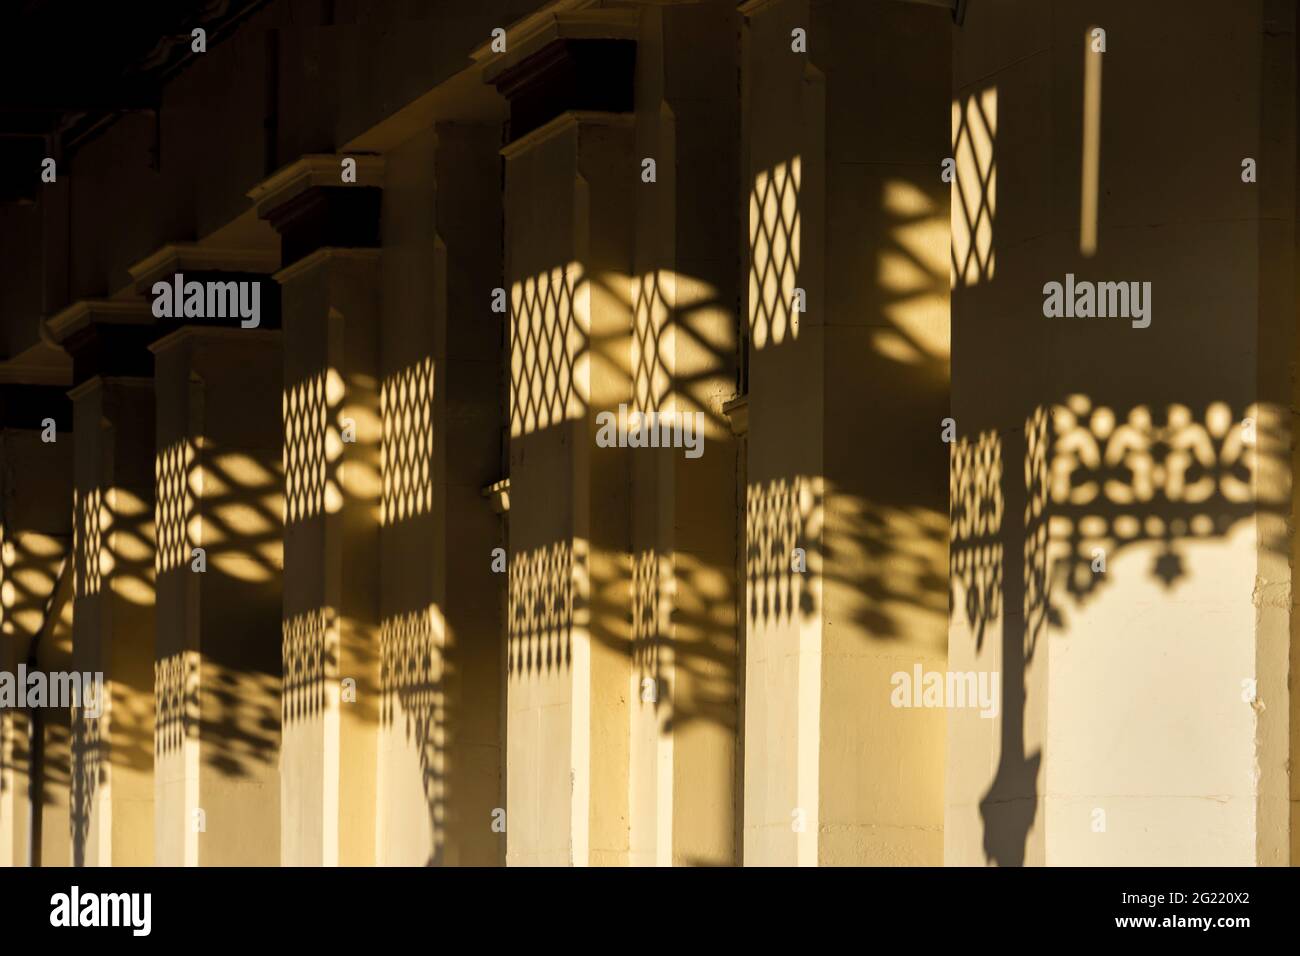 Detail of early morning shadows made by fancy cast iron lace on the walls of an old painted sandstone building. Stock Photo